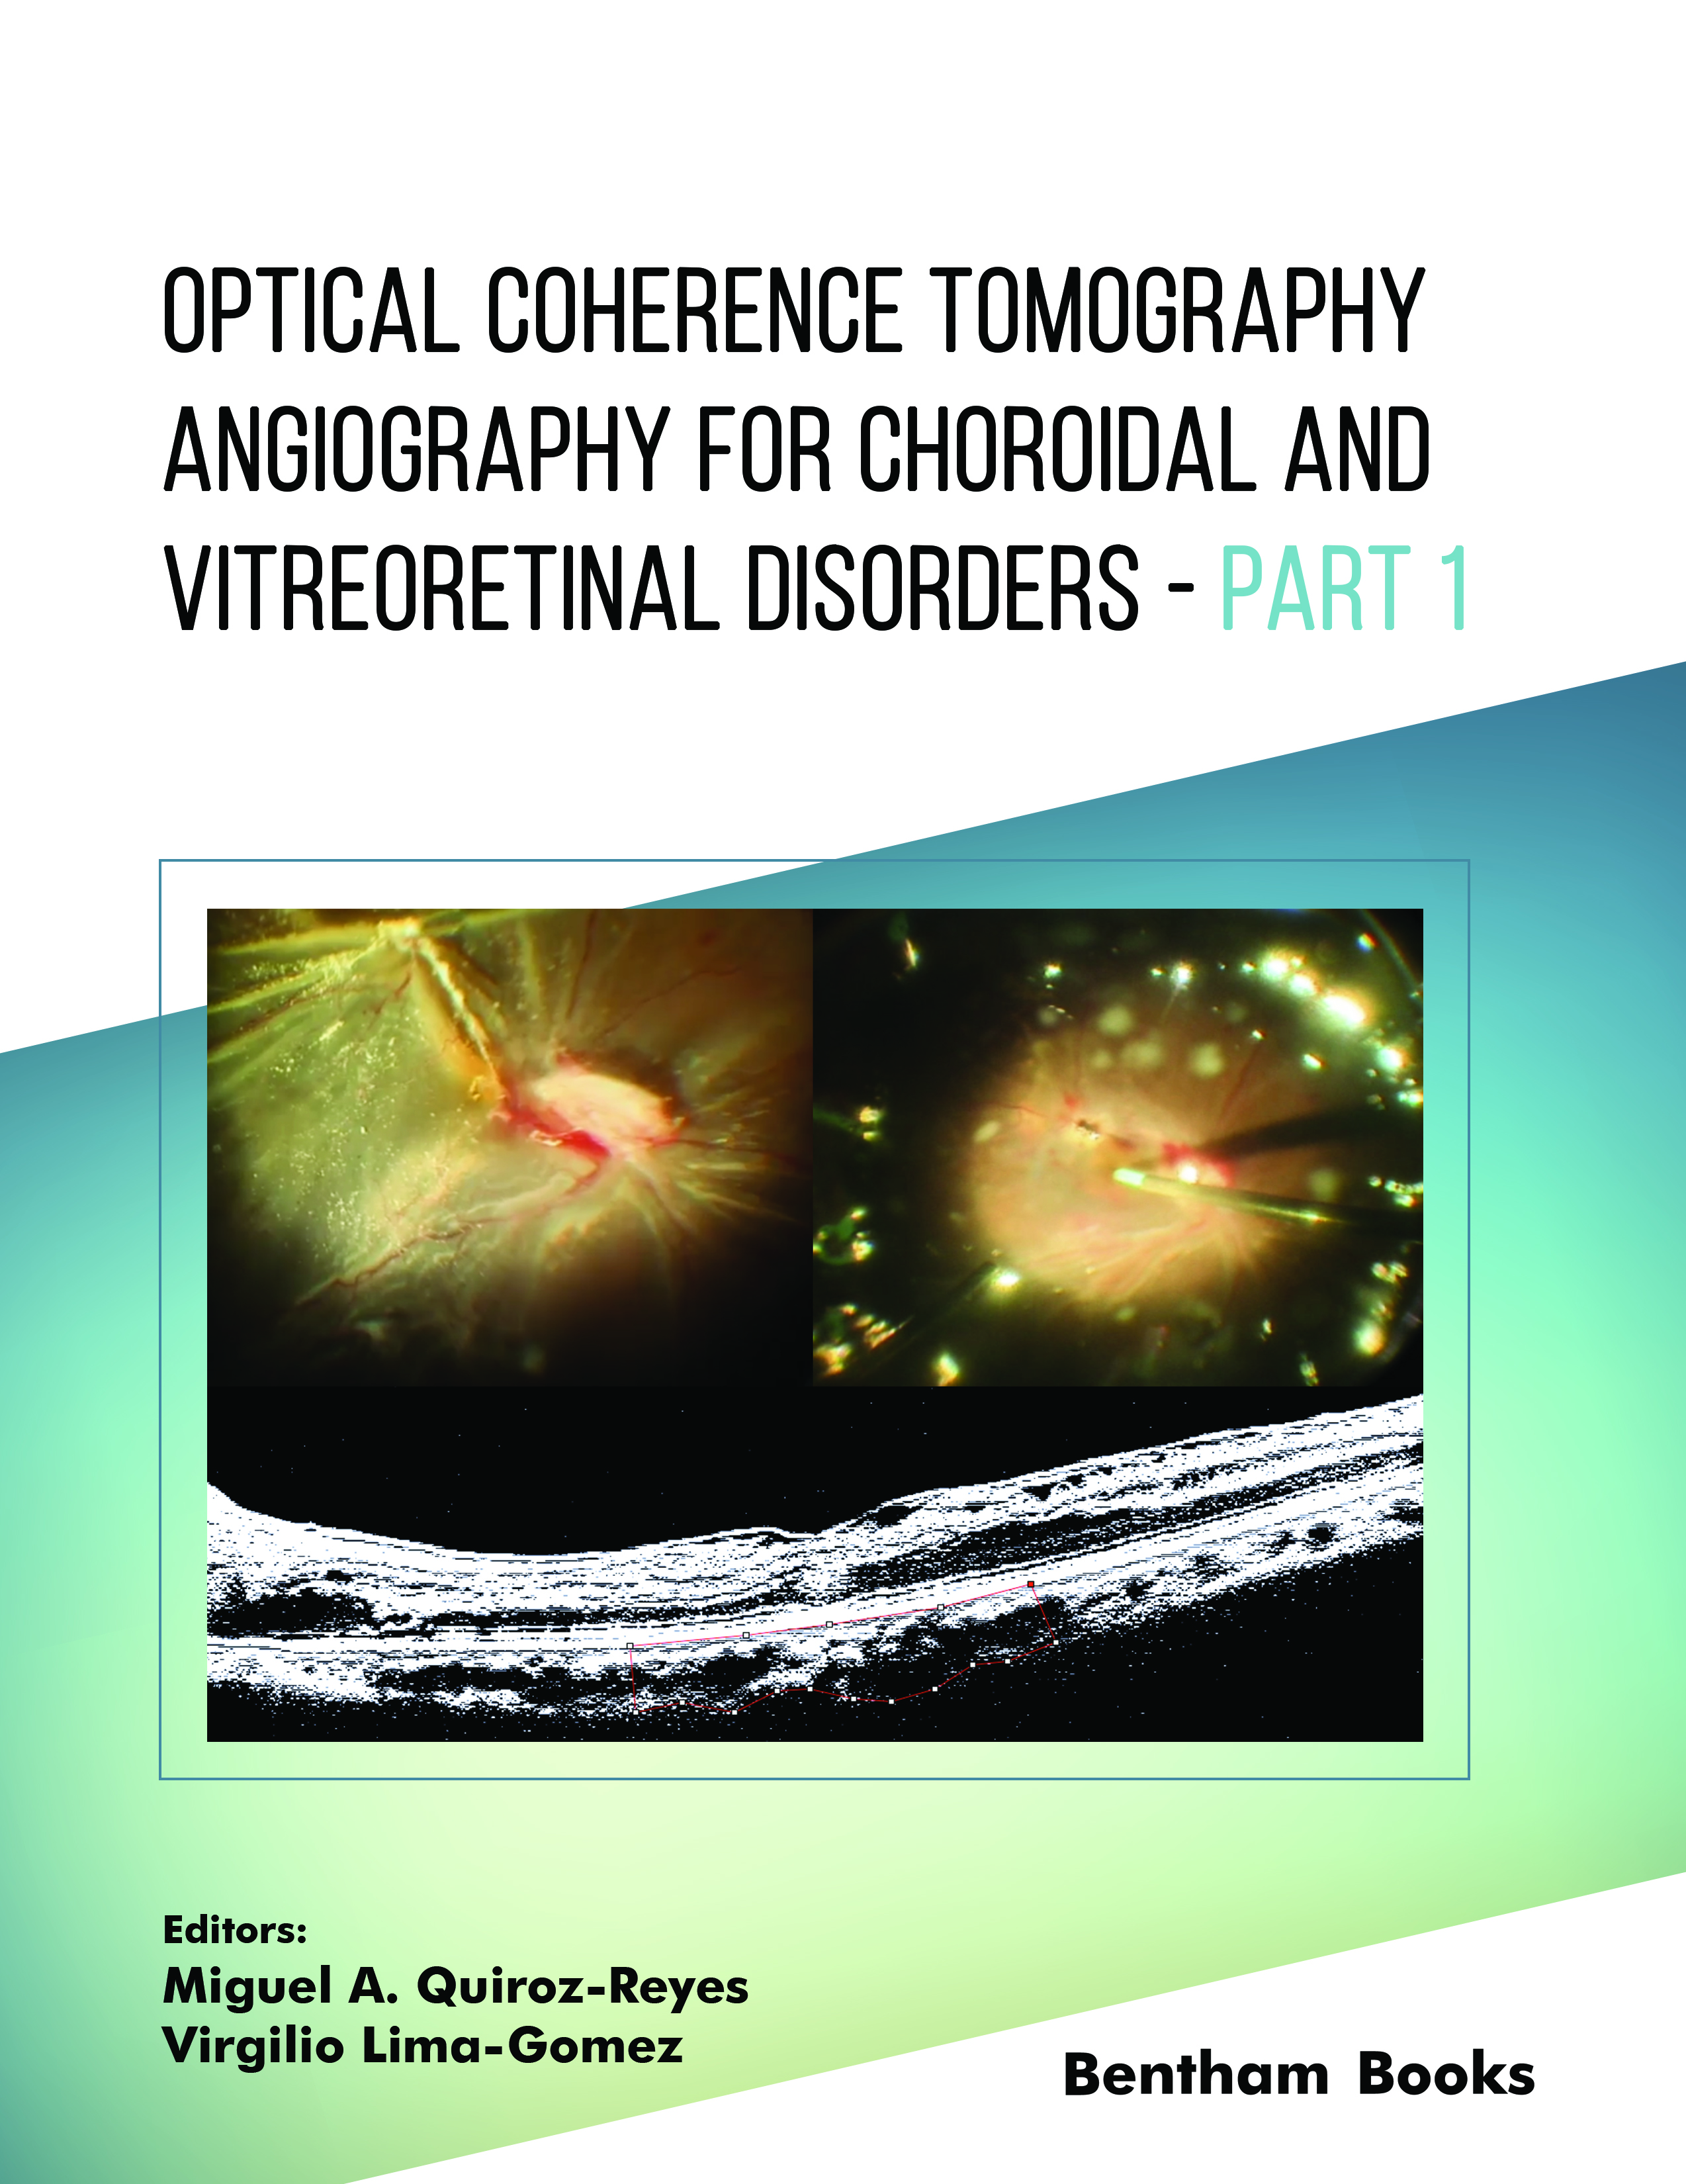 Optical Coherence Tomography Angiography for Choroidal and Vitreoretinal Disorders – Part 1